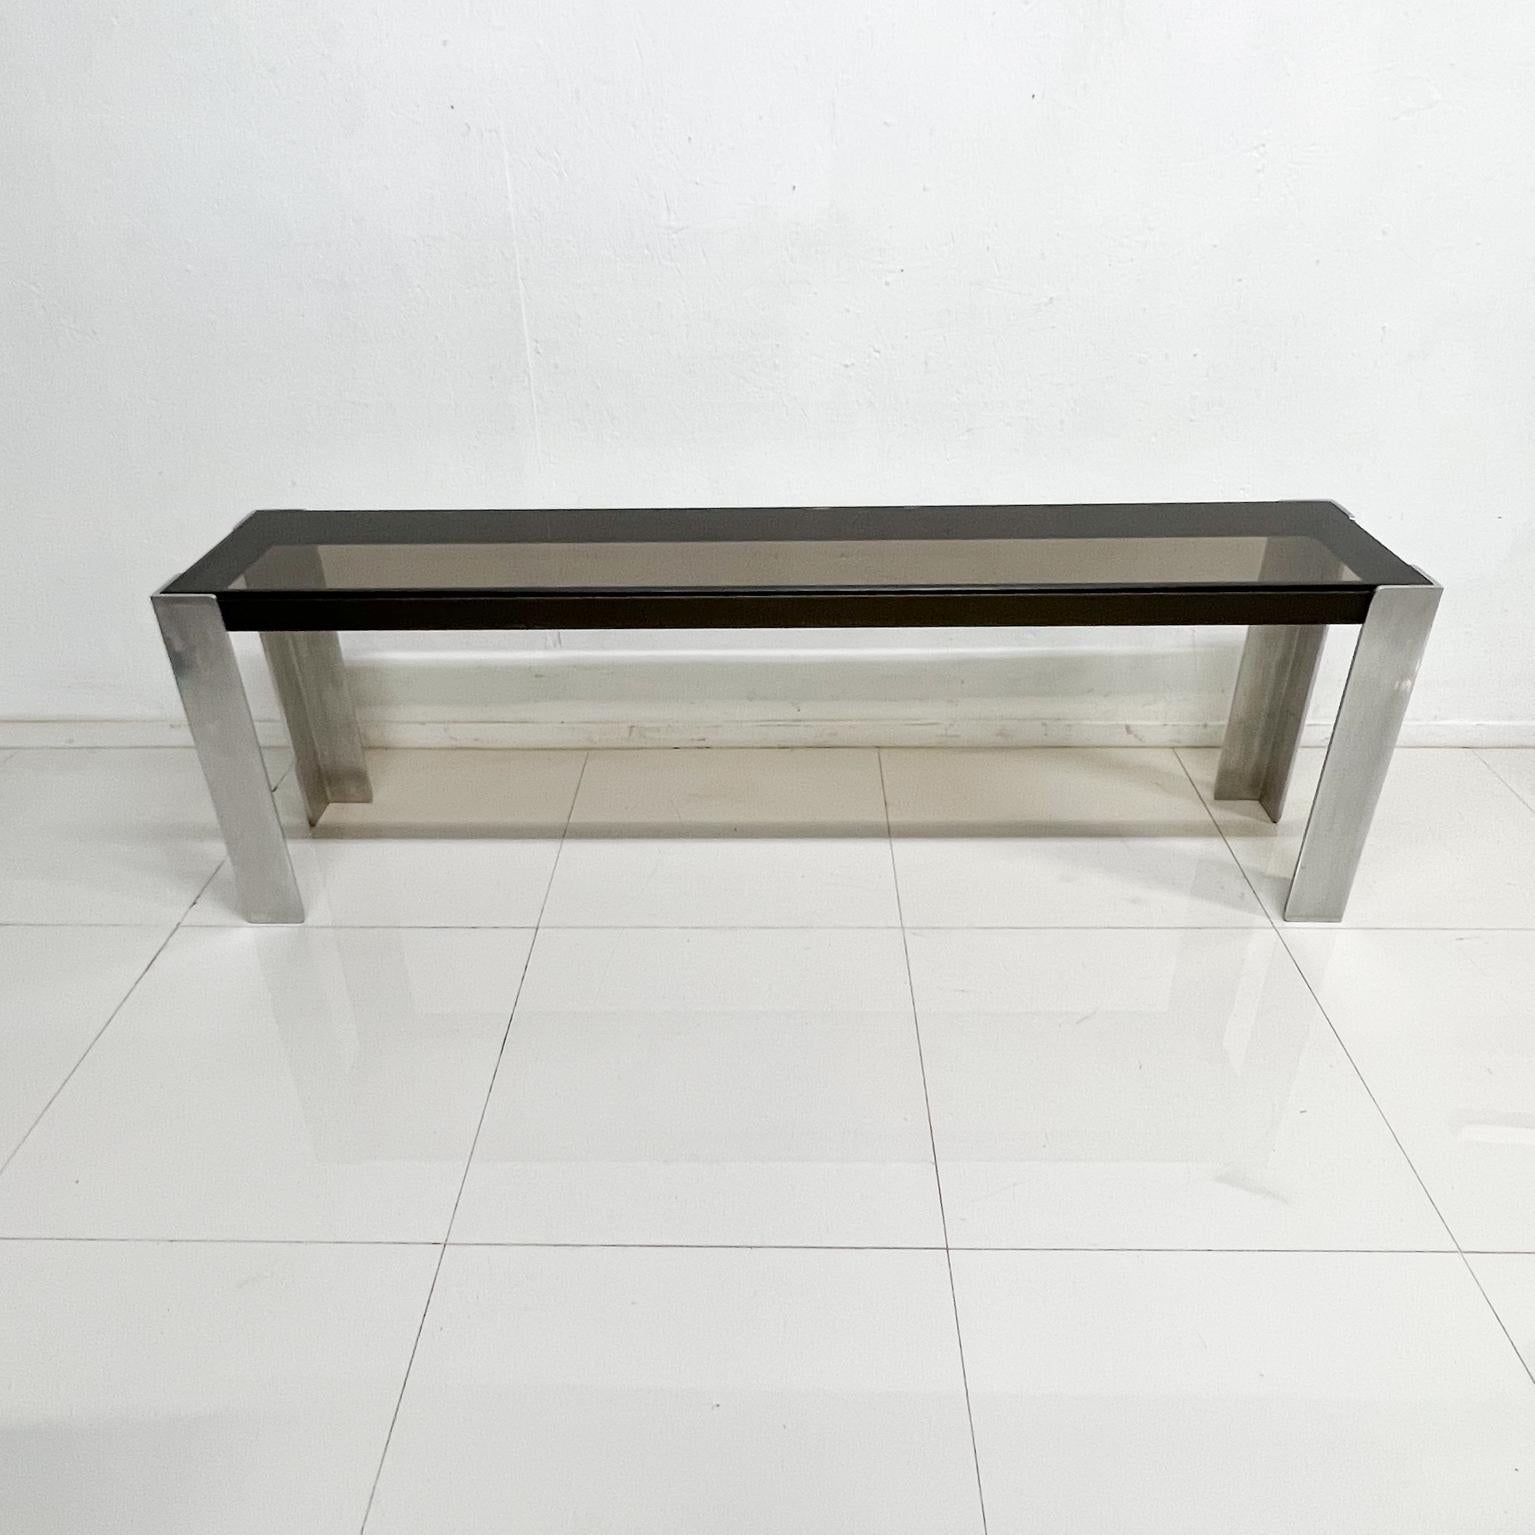 1970s Modernist Aluminum Console Sofa Table Style of Milo Baughman
Unmarked.
We have listed matching coffee table. 
23 tall x 15 d x 70.75 w
Preowned original vintage condition.
Delivery to LA OC Palm Springs



